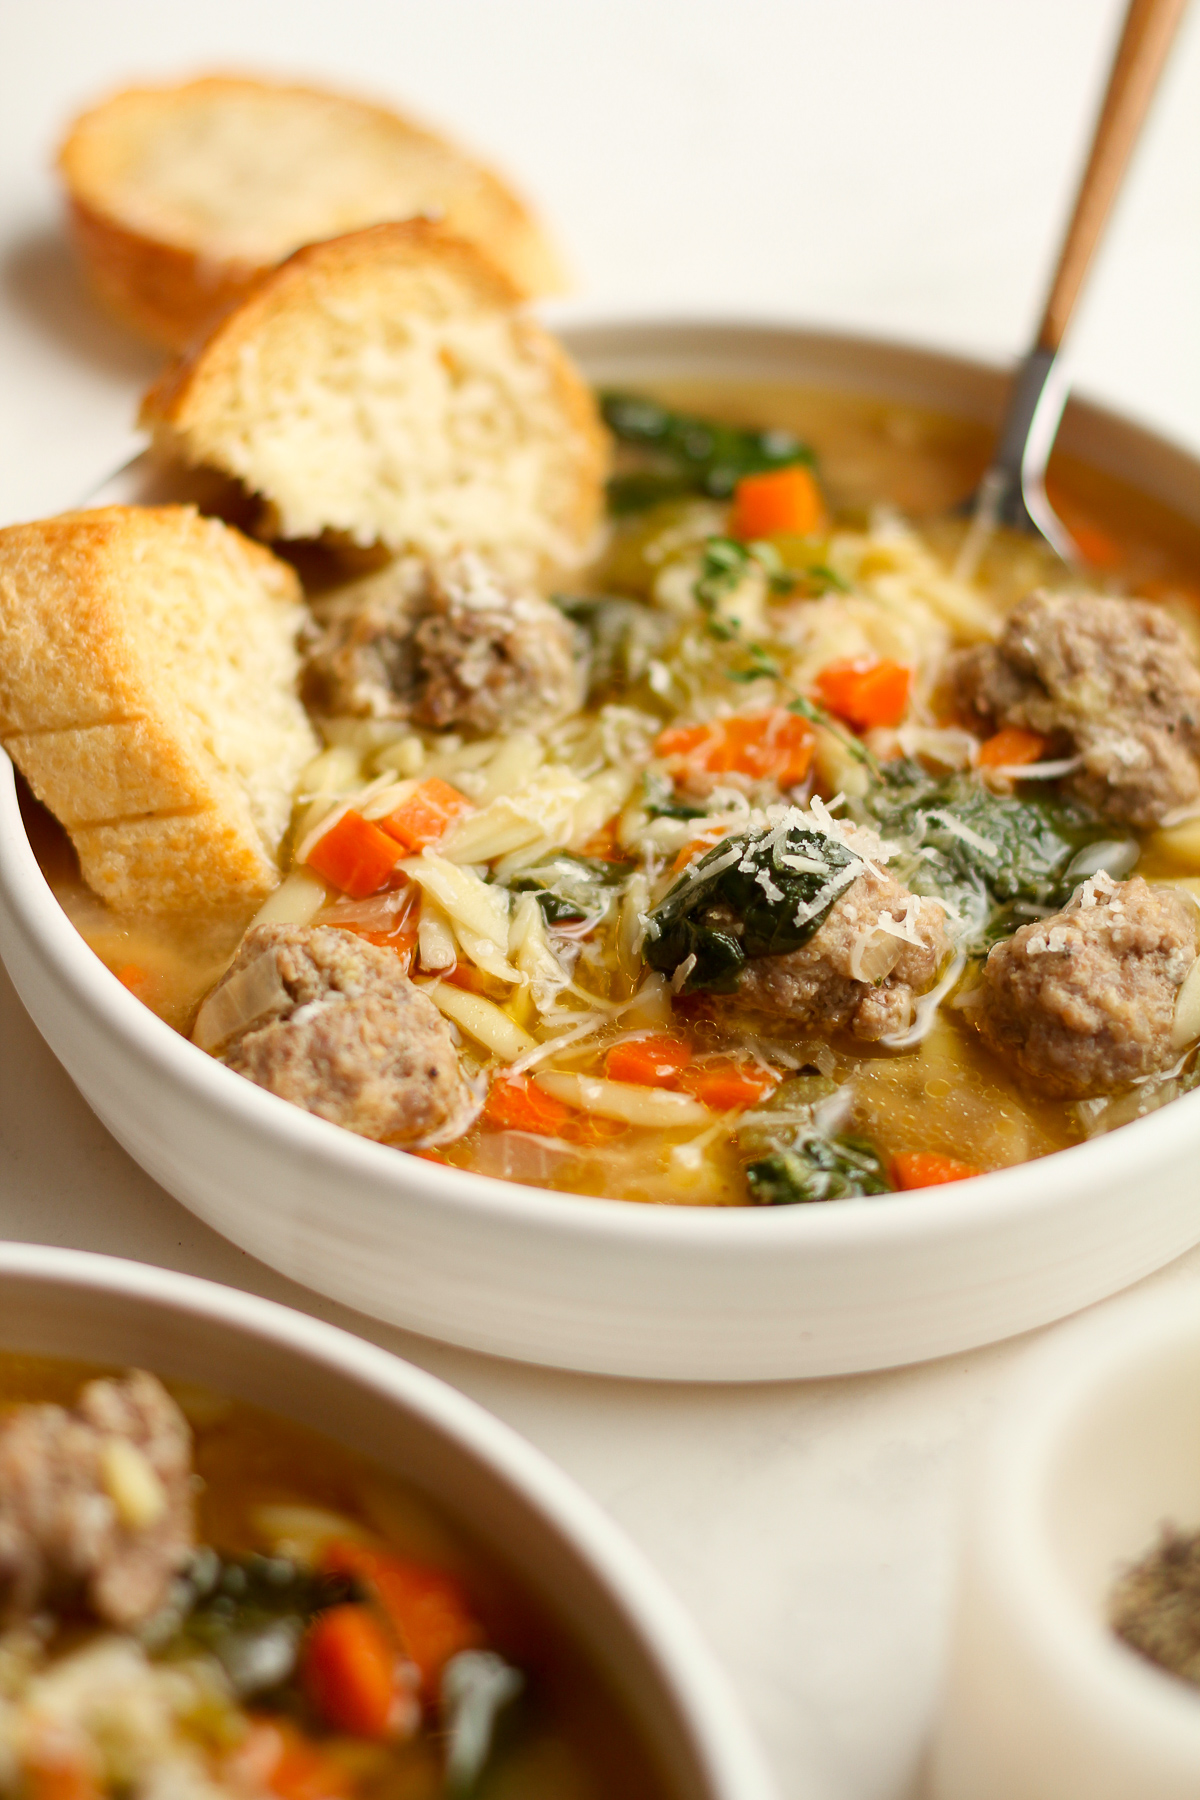 Side view of two bowls of meatball wedding soup.